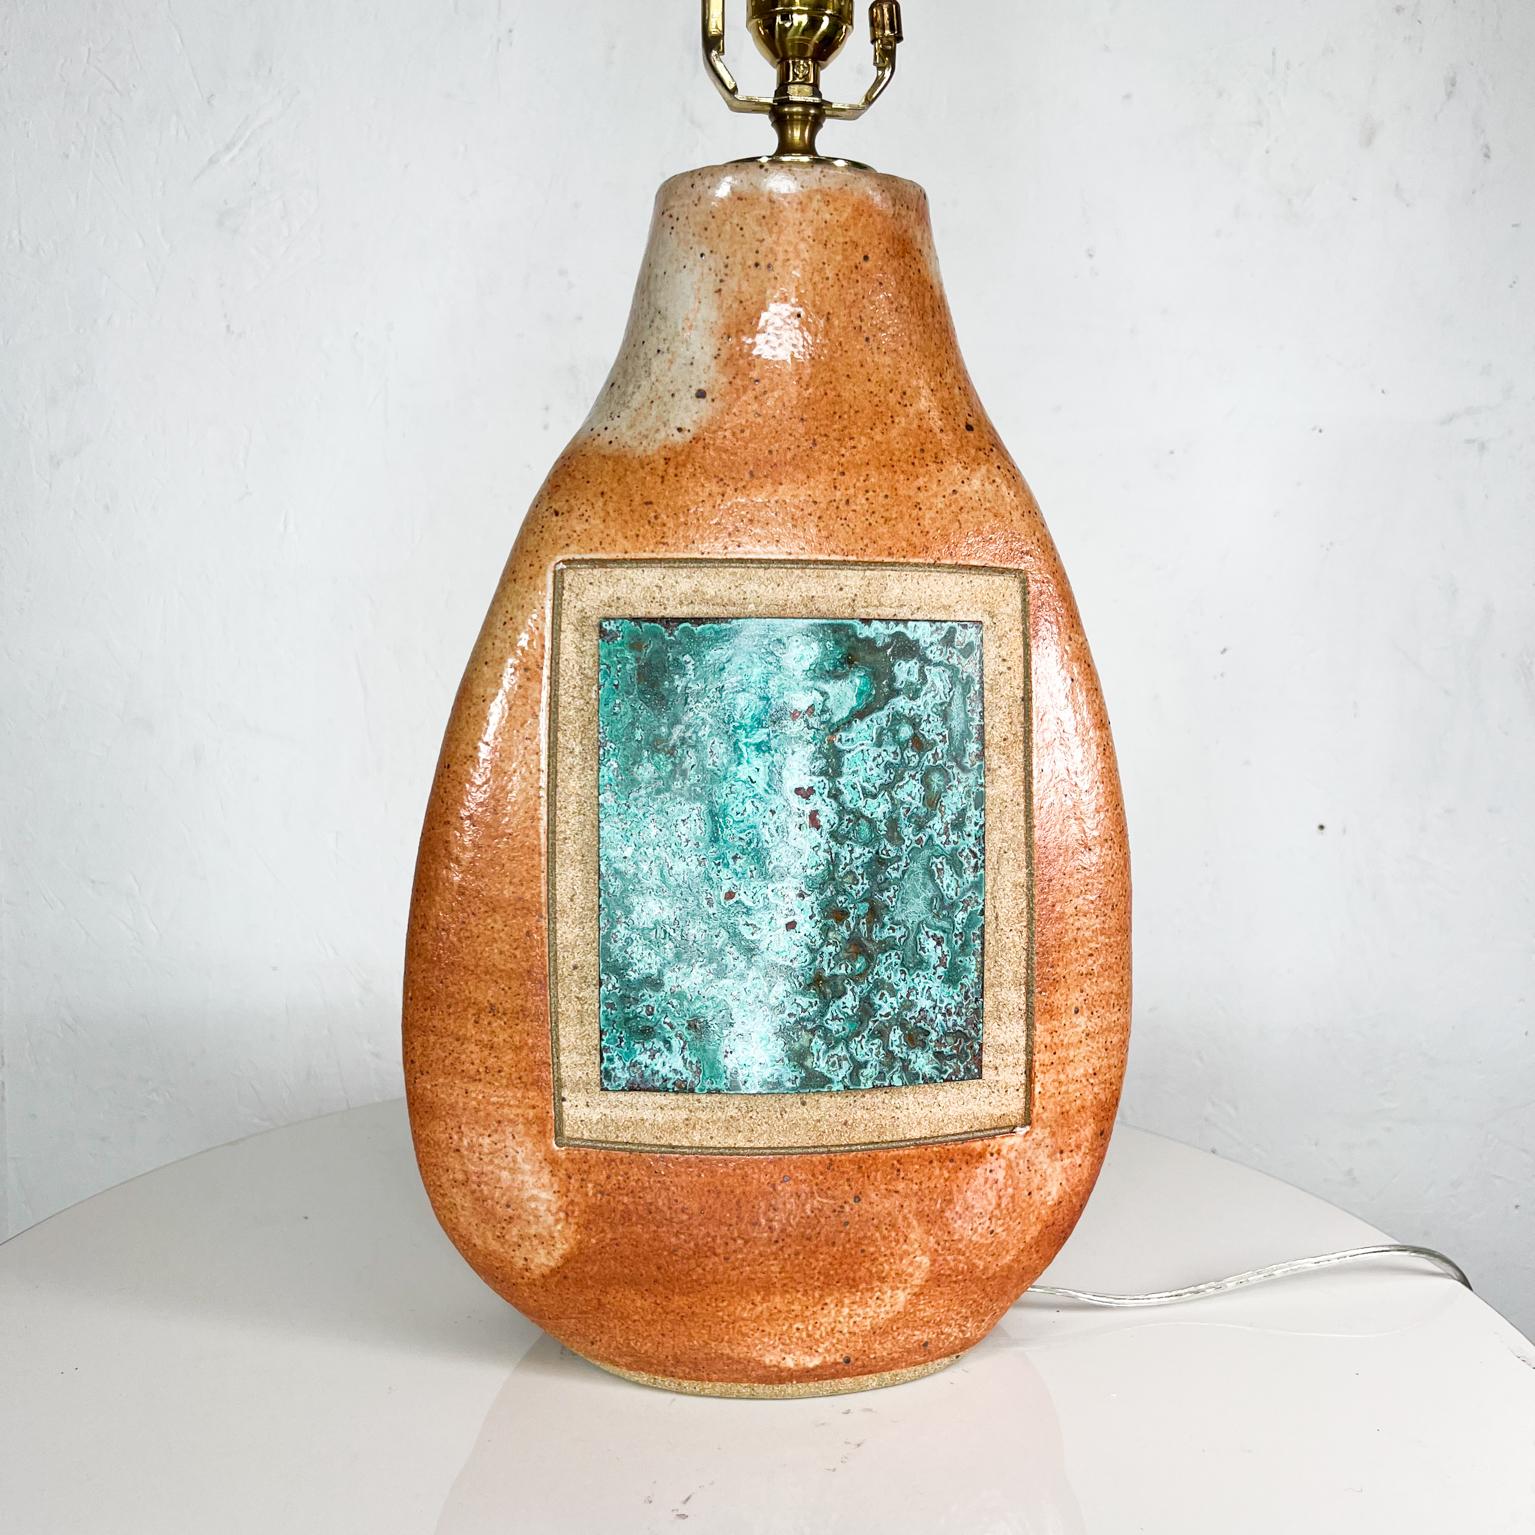 Modern 2014 New Mexico Art Pottery W. Kohler Co Table Lamp & Shade Patinated Copper